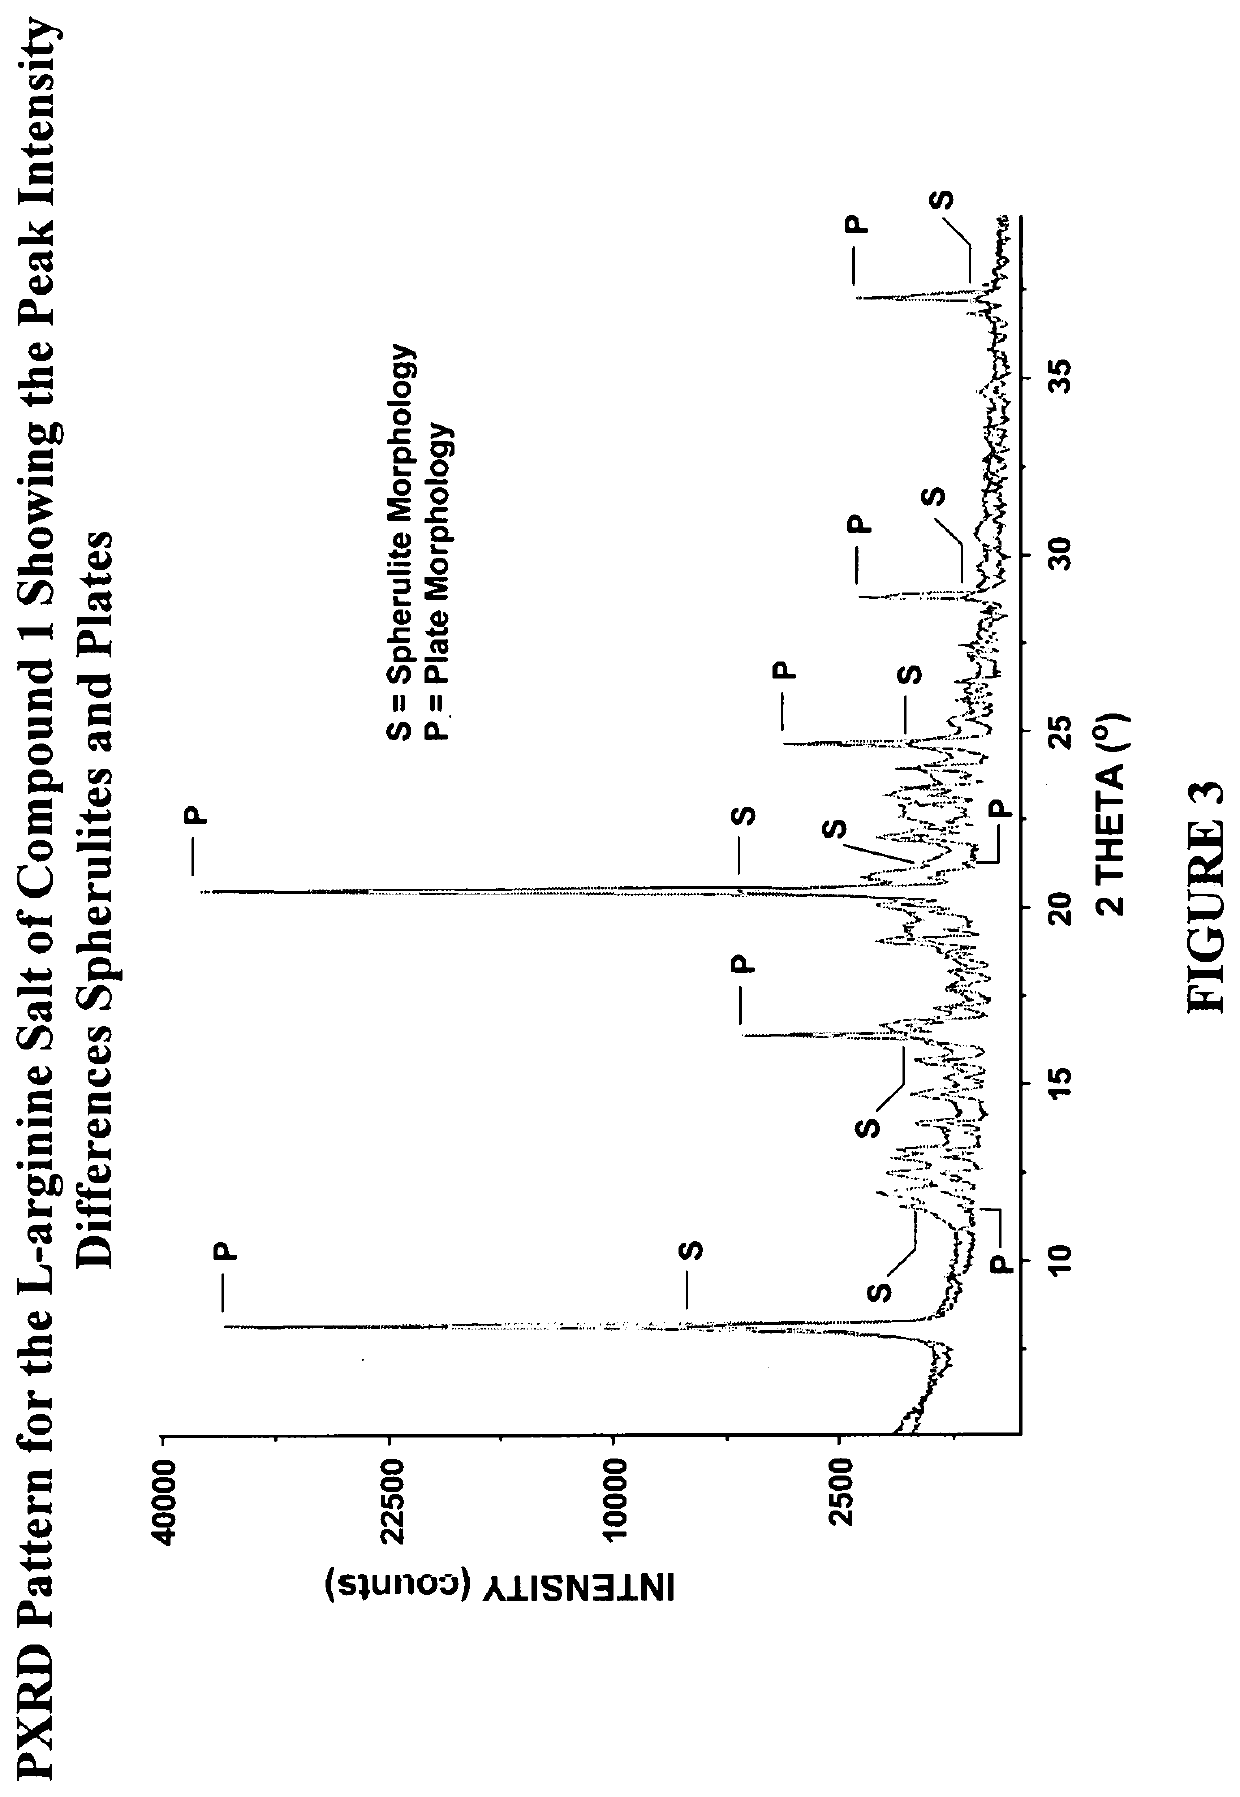 Compounds and methods for treatment of inflammatory bowel disease with extra-intestinal manifestations